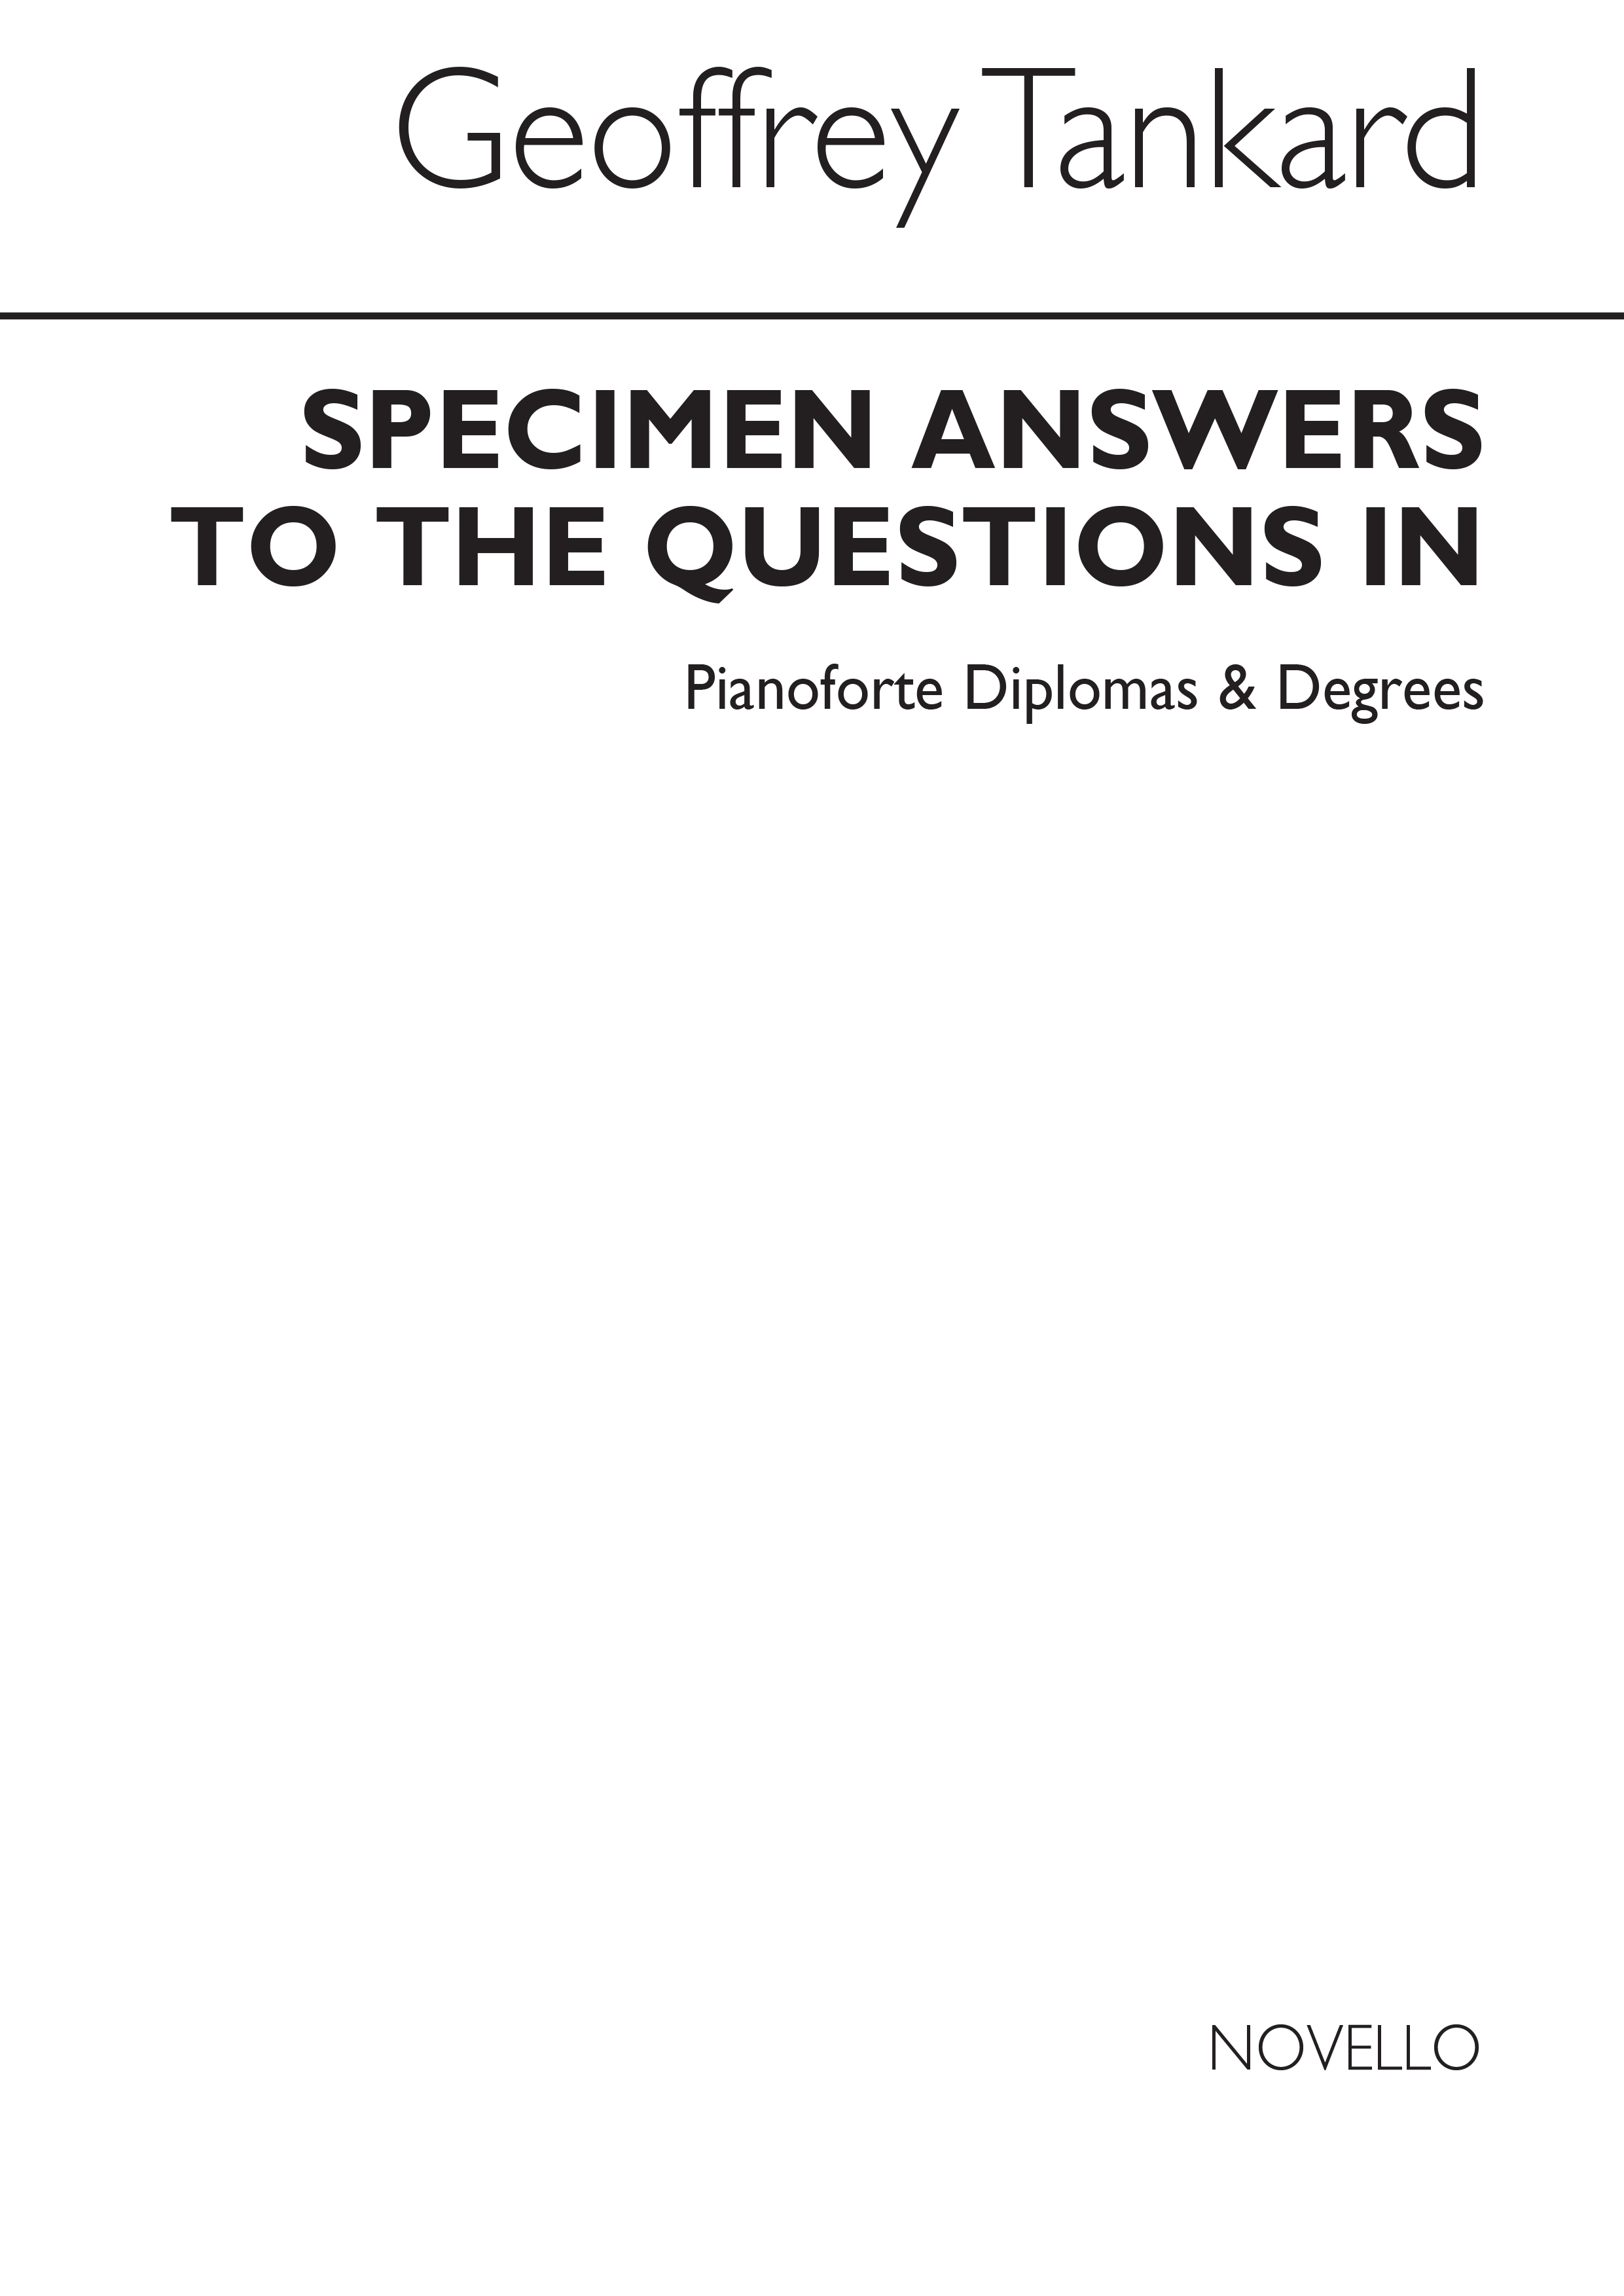 Geoffrey Tankard: Specimen Answers To The Questions